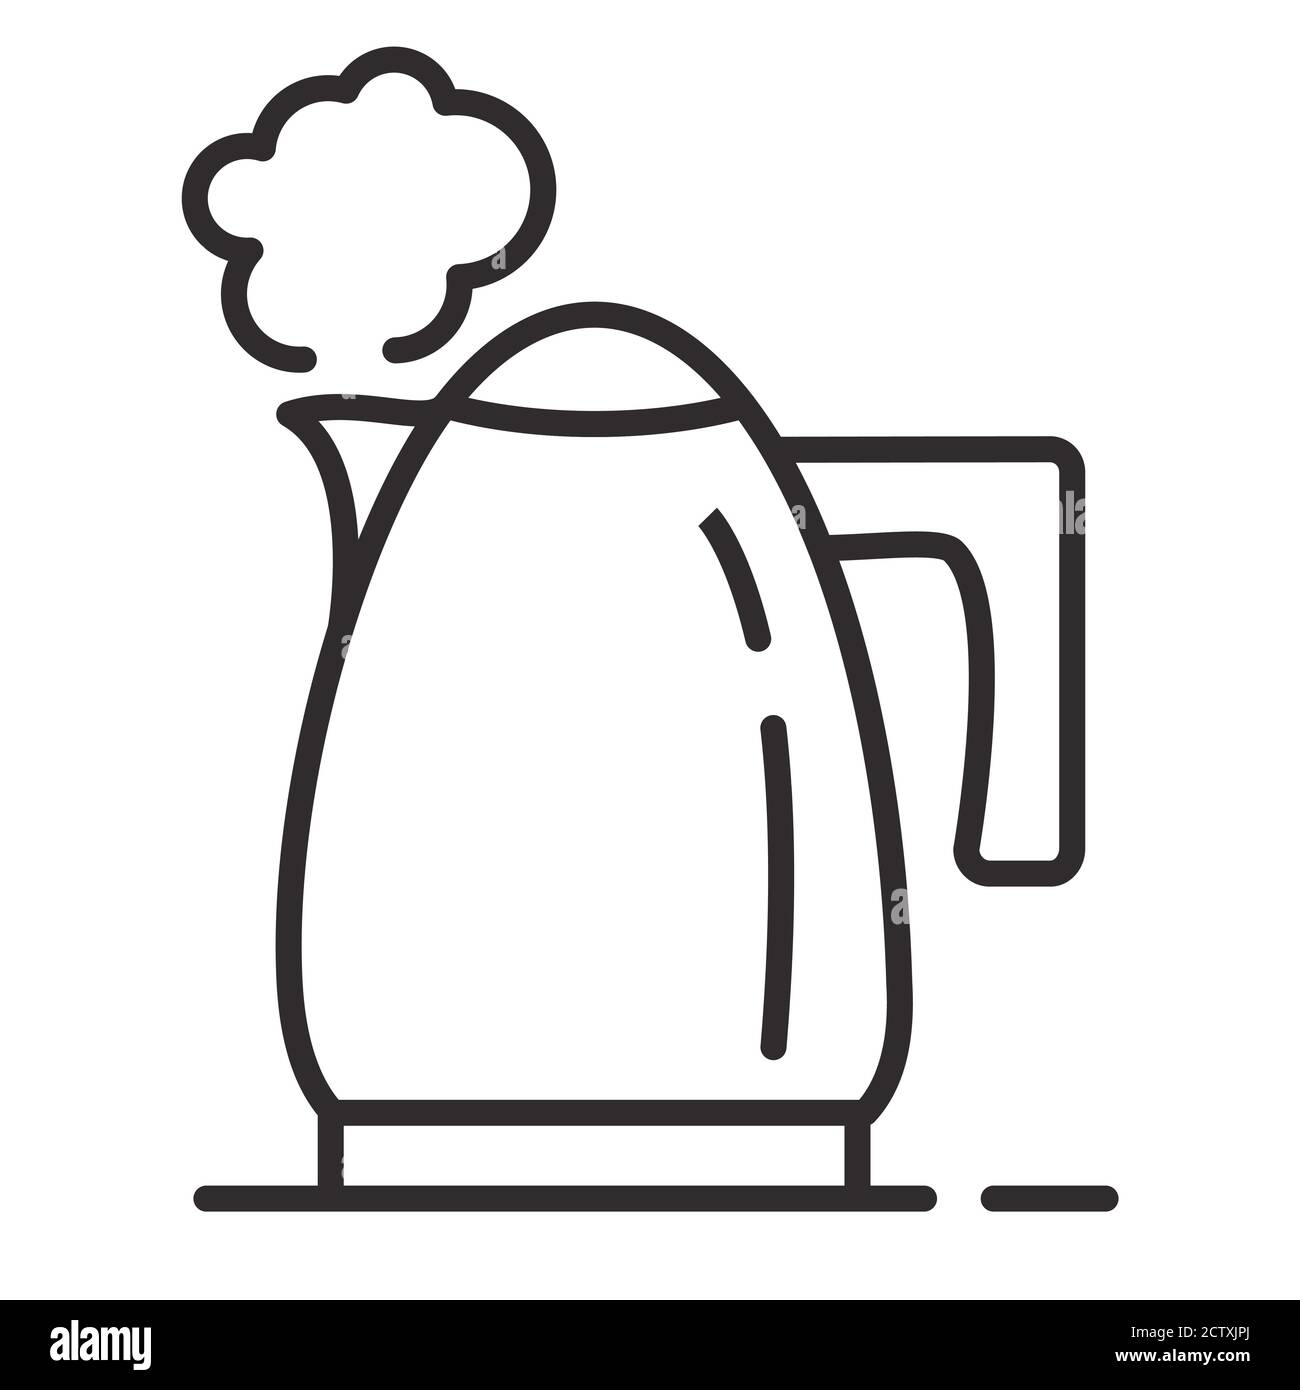 https://c8.alamy.com/comp/2CTXJPJ/icon-electric-kettle-boiling-outline-vector-isolated-on-white-background-2CTXJPJ.jpg